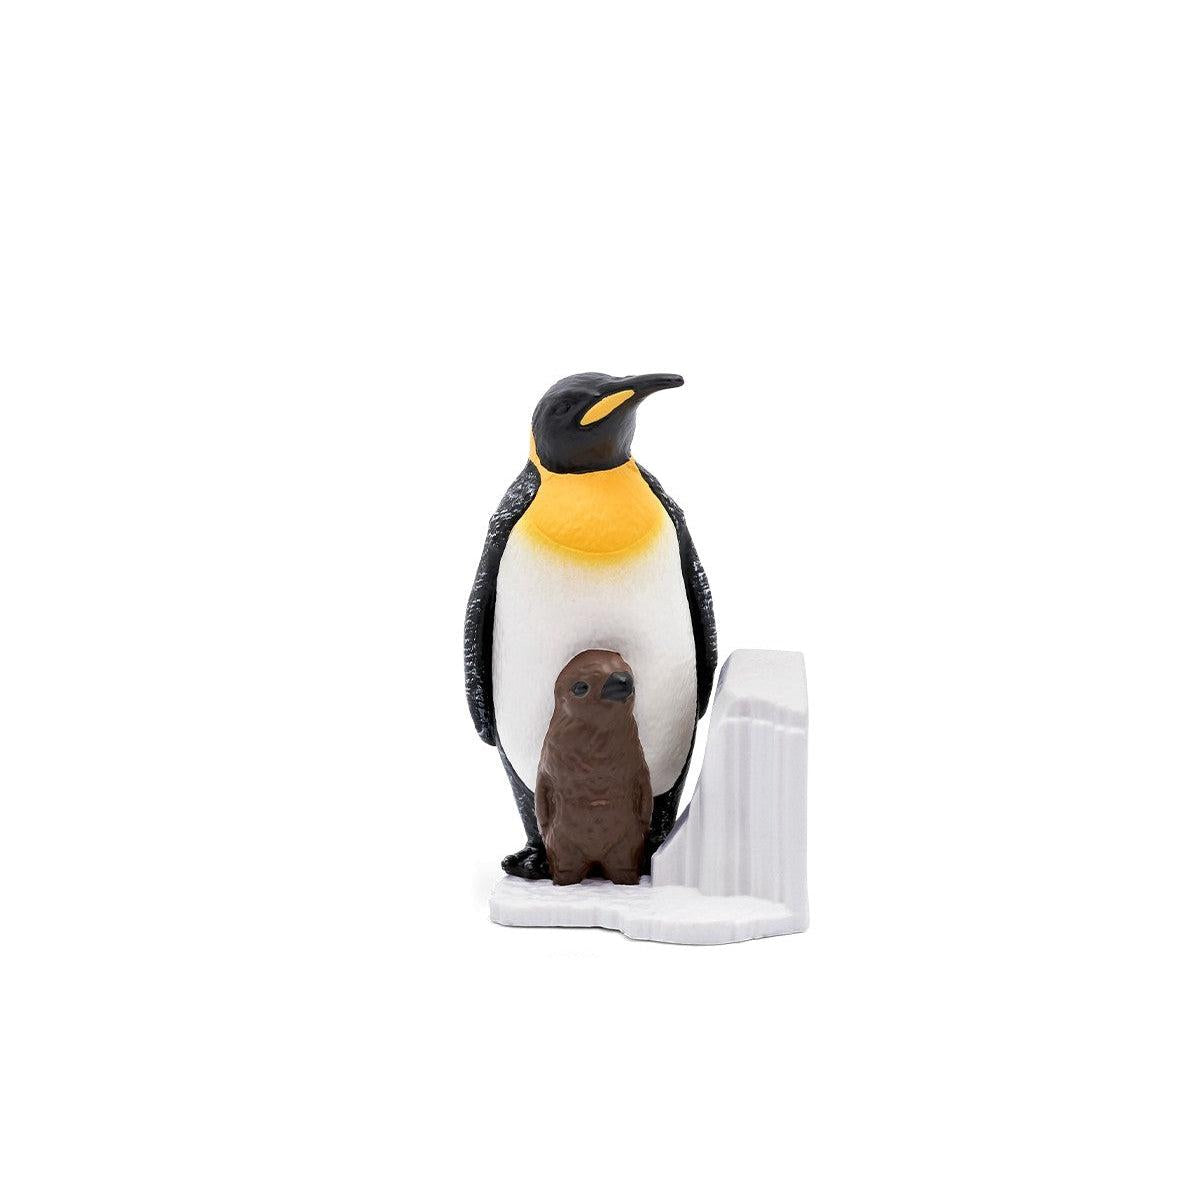 Tonies National Geographic Penguin - Audio Character for use with Toniebox Player